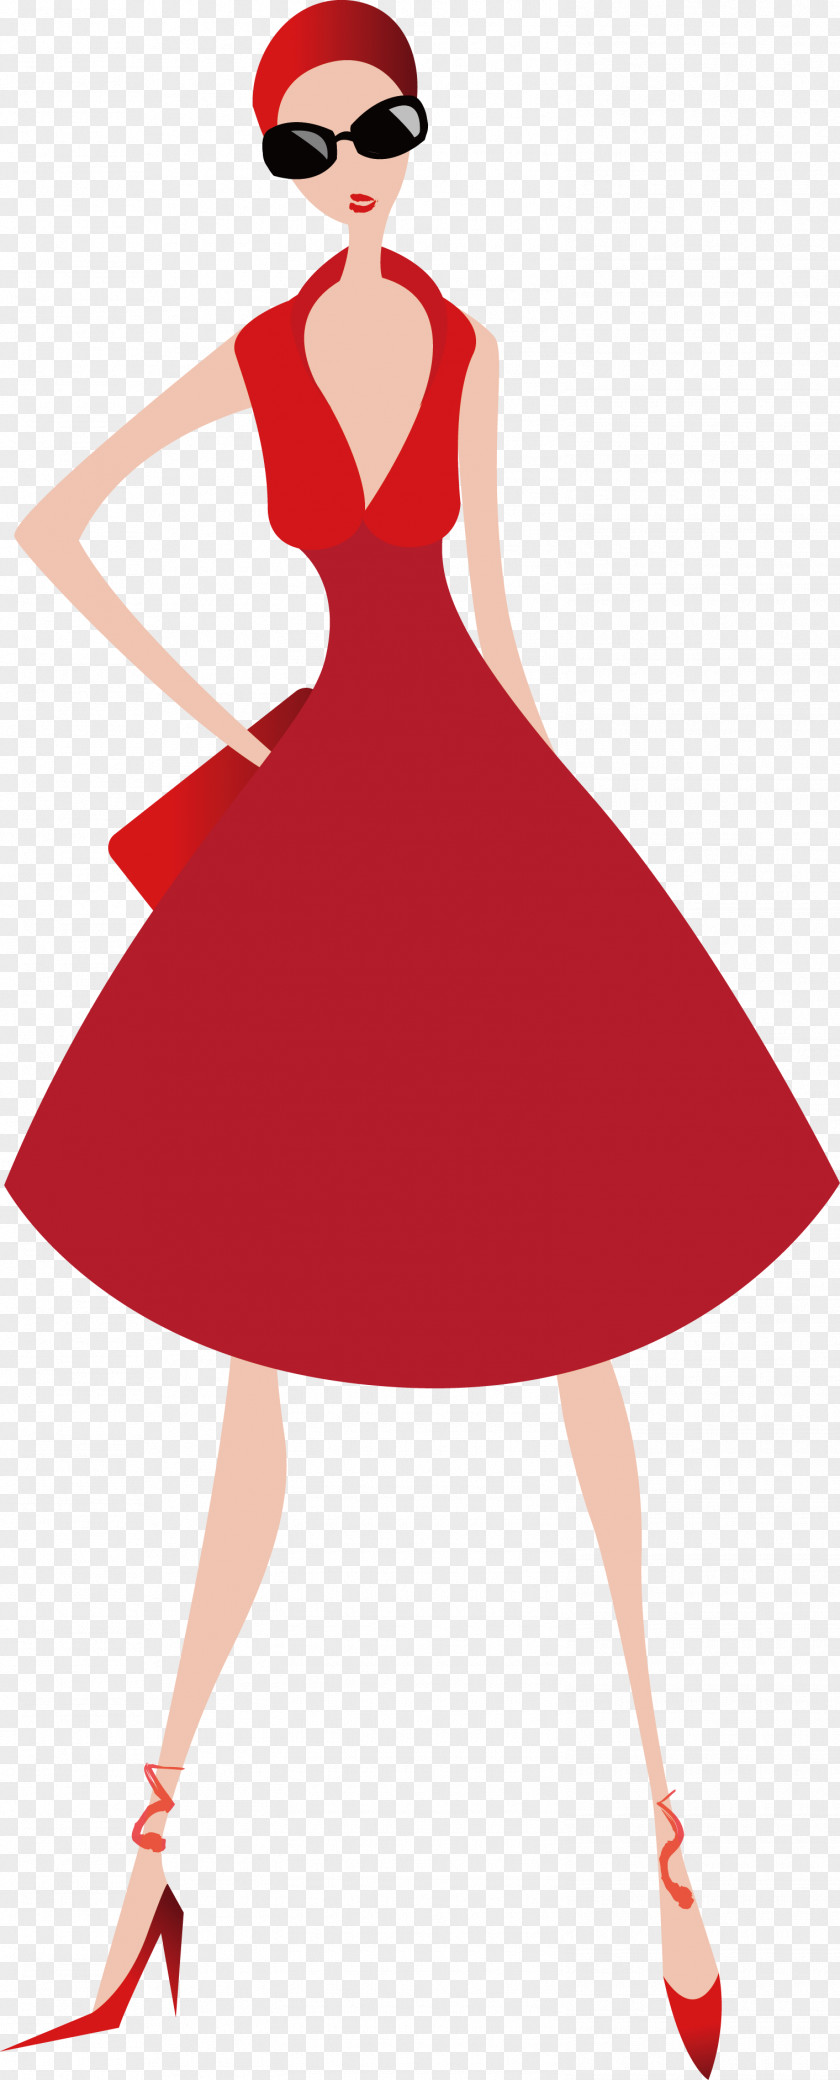 Woman In Red Dress Skirt Illustration PNG